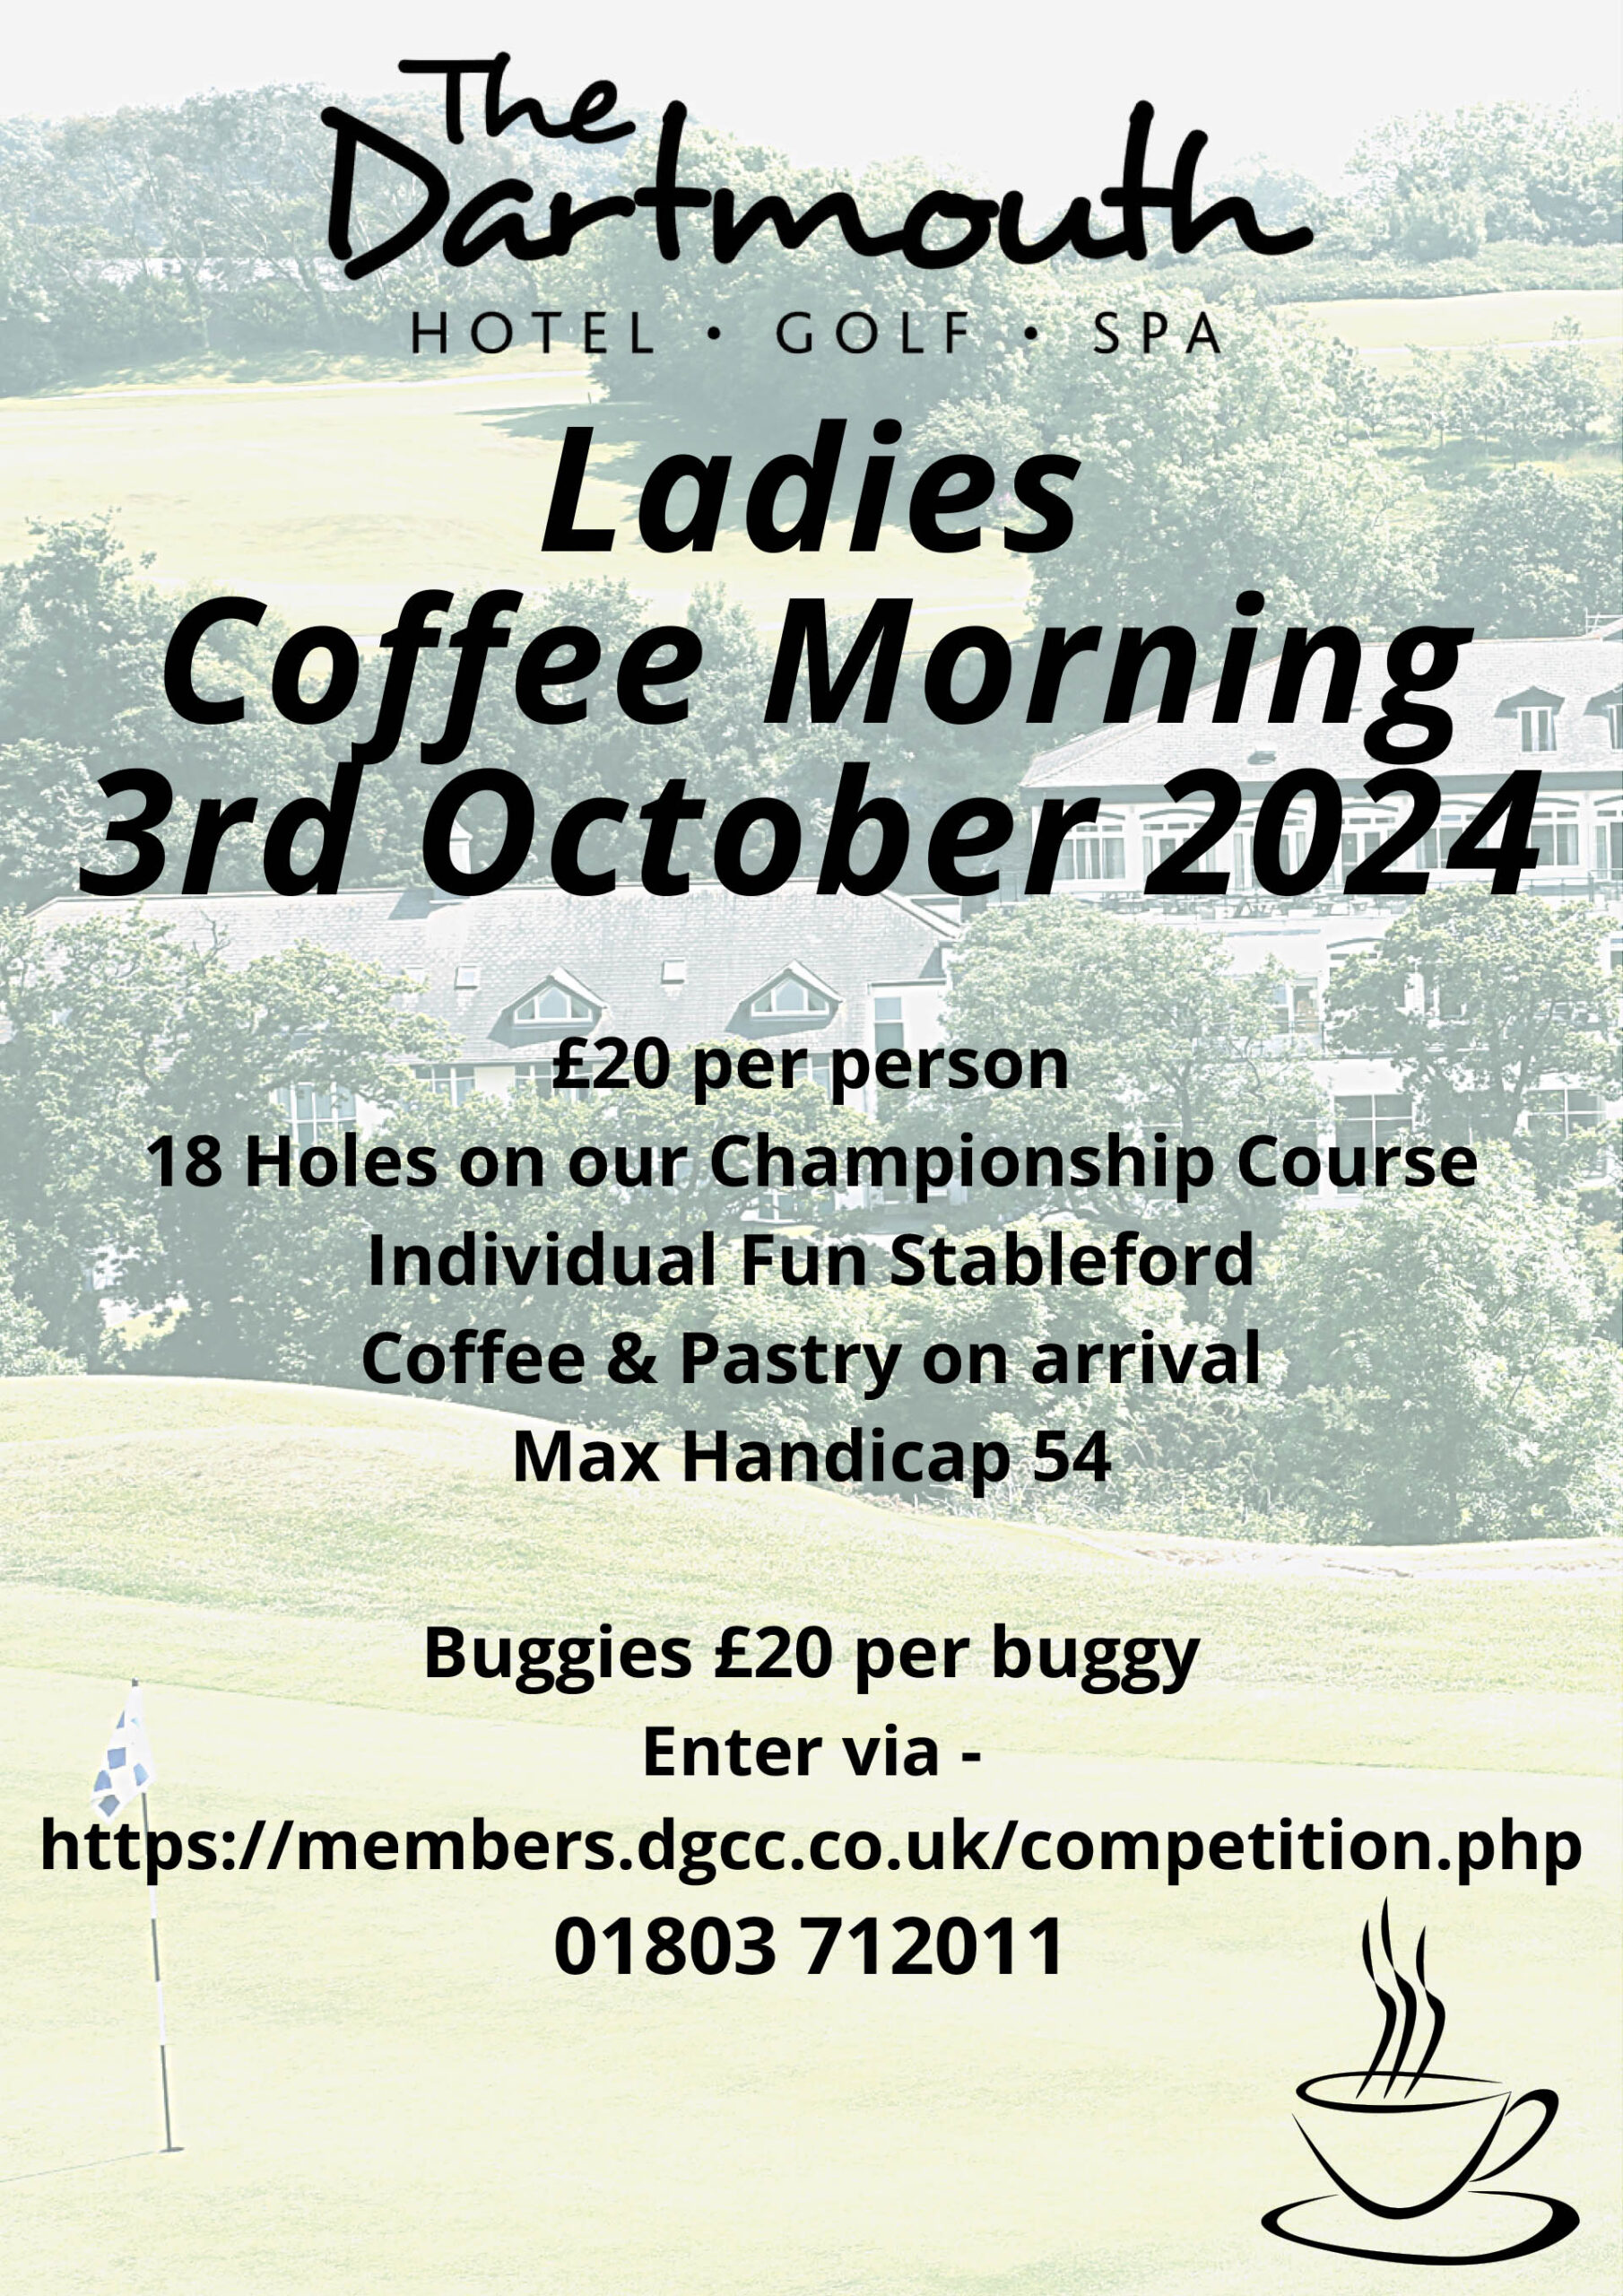 Ladies Coffee Morning at the Dartmouth Hotel Golf & Spa